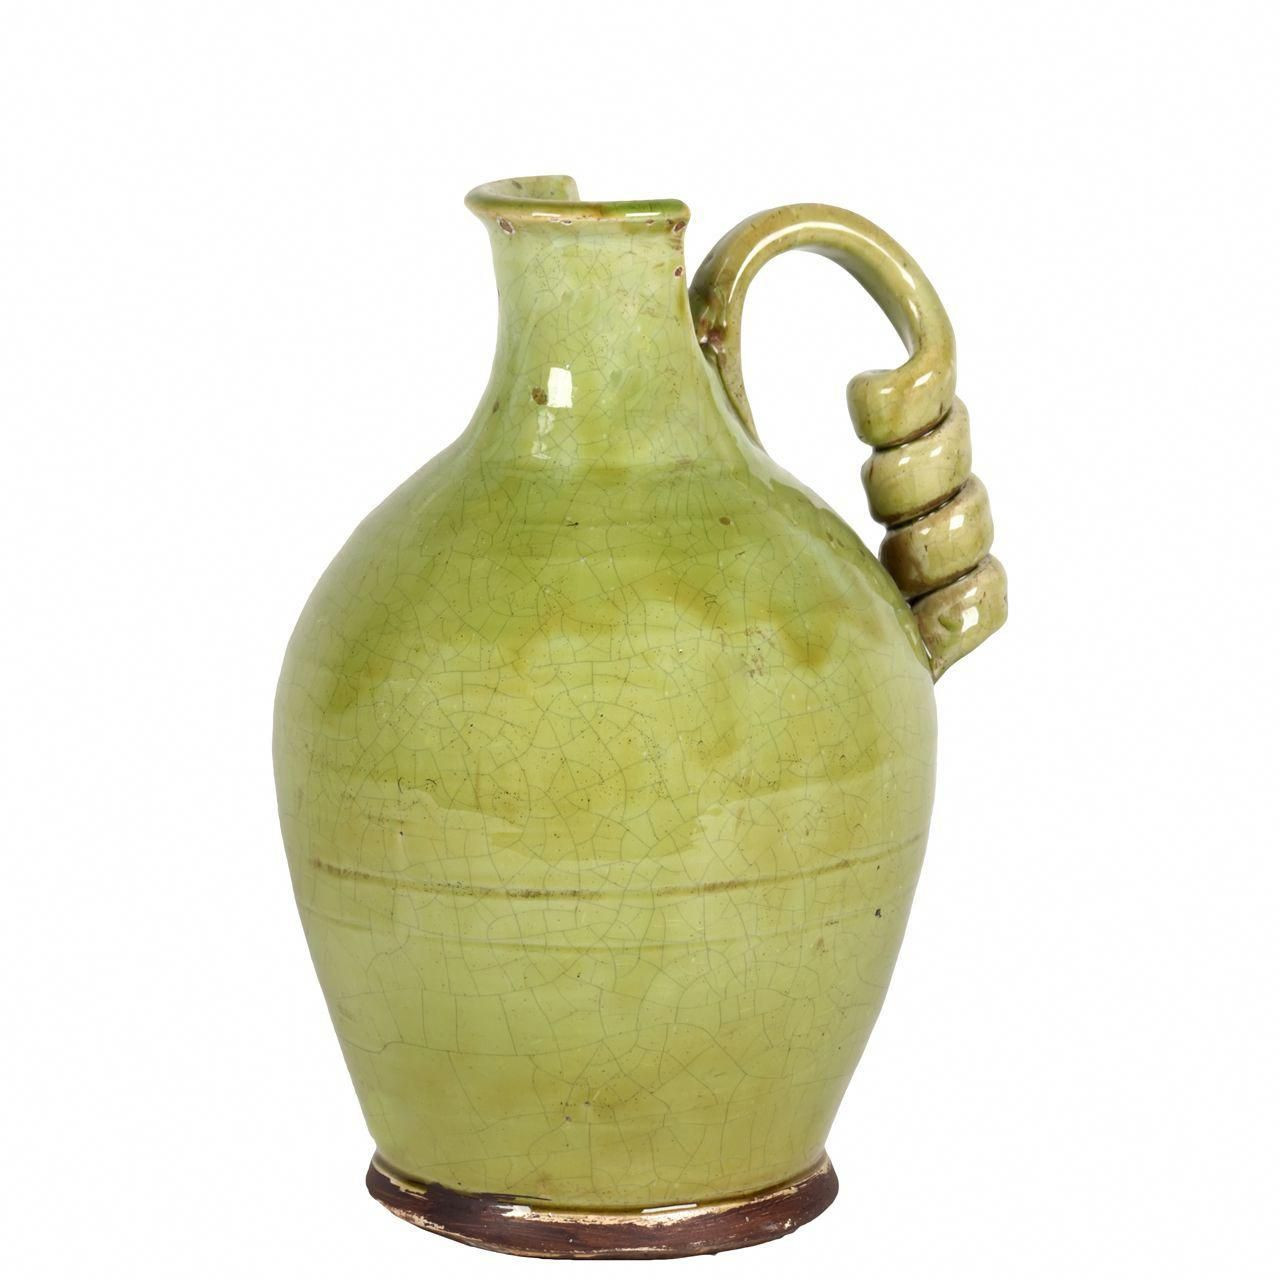 16 Fabulous Tuscan Ceramic Vases 2024 free download tuscan ceramic vases of add to your decor with this lovely ceramic tuscan vase this throughout add to your decor with this lovely ceramic tuscan vase this decorative vase features a